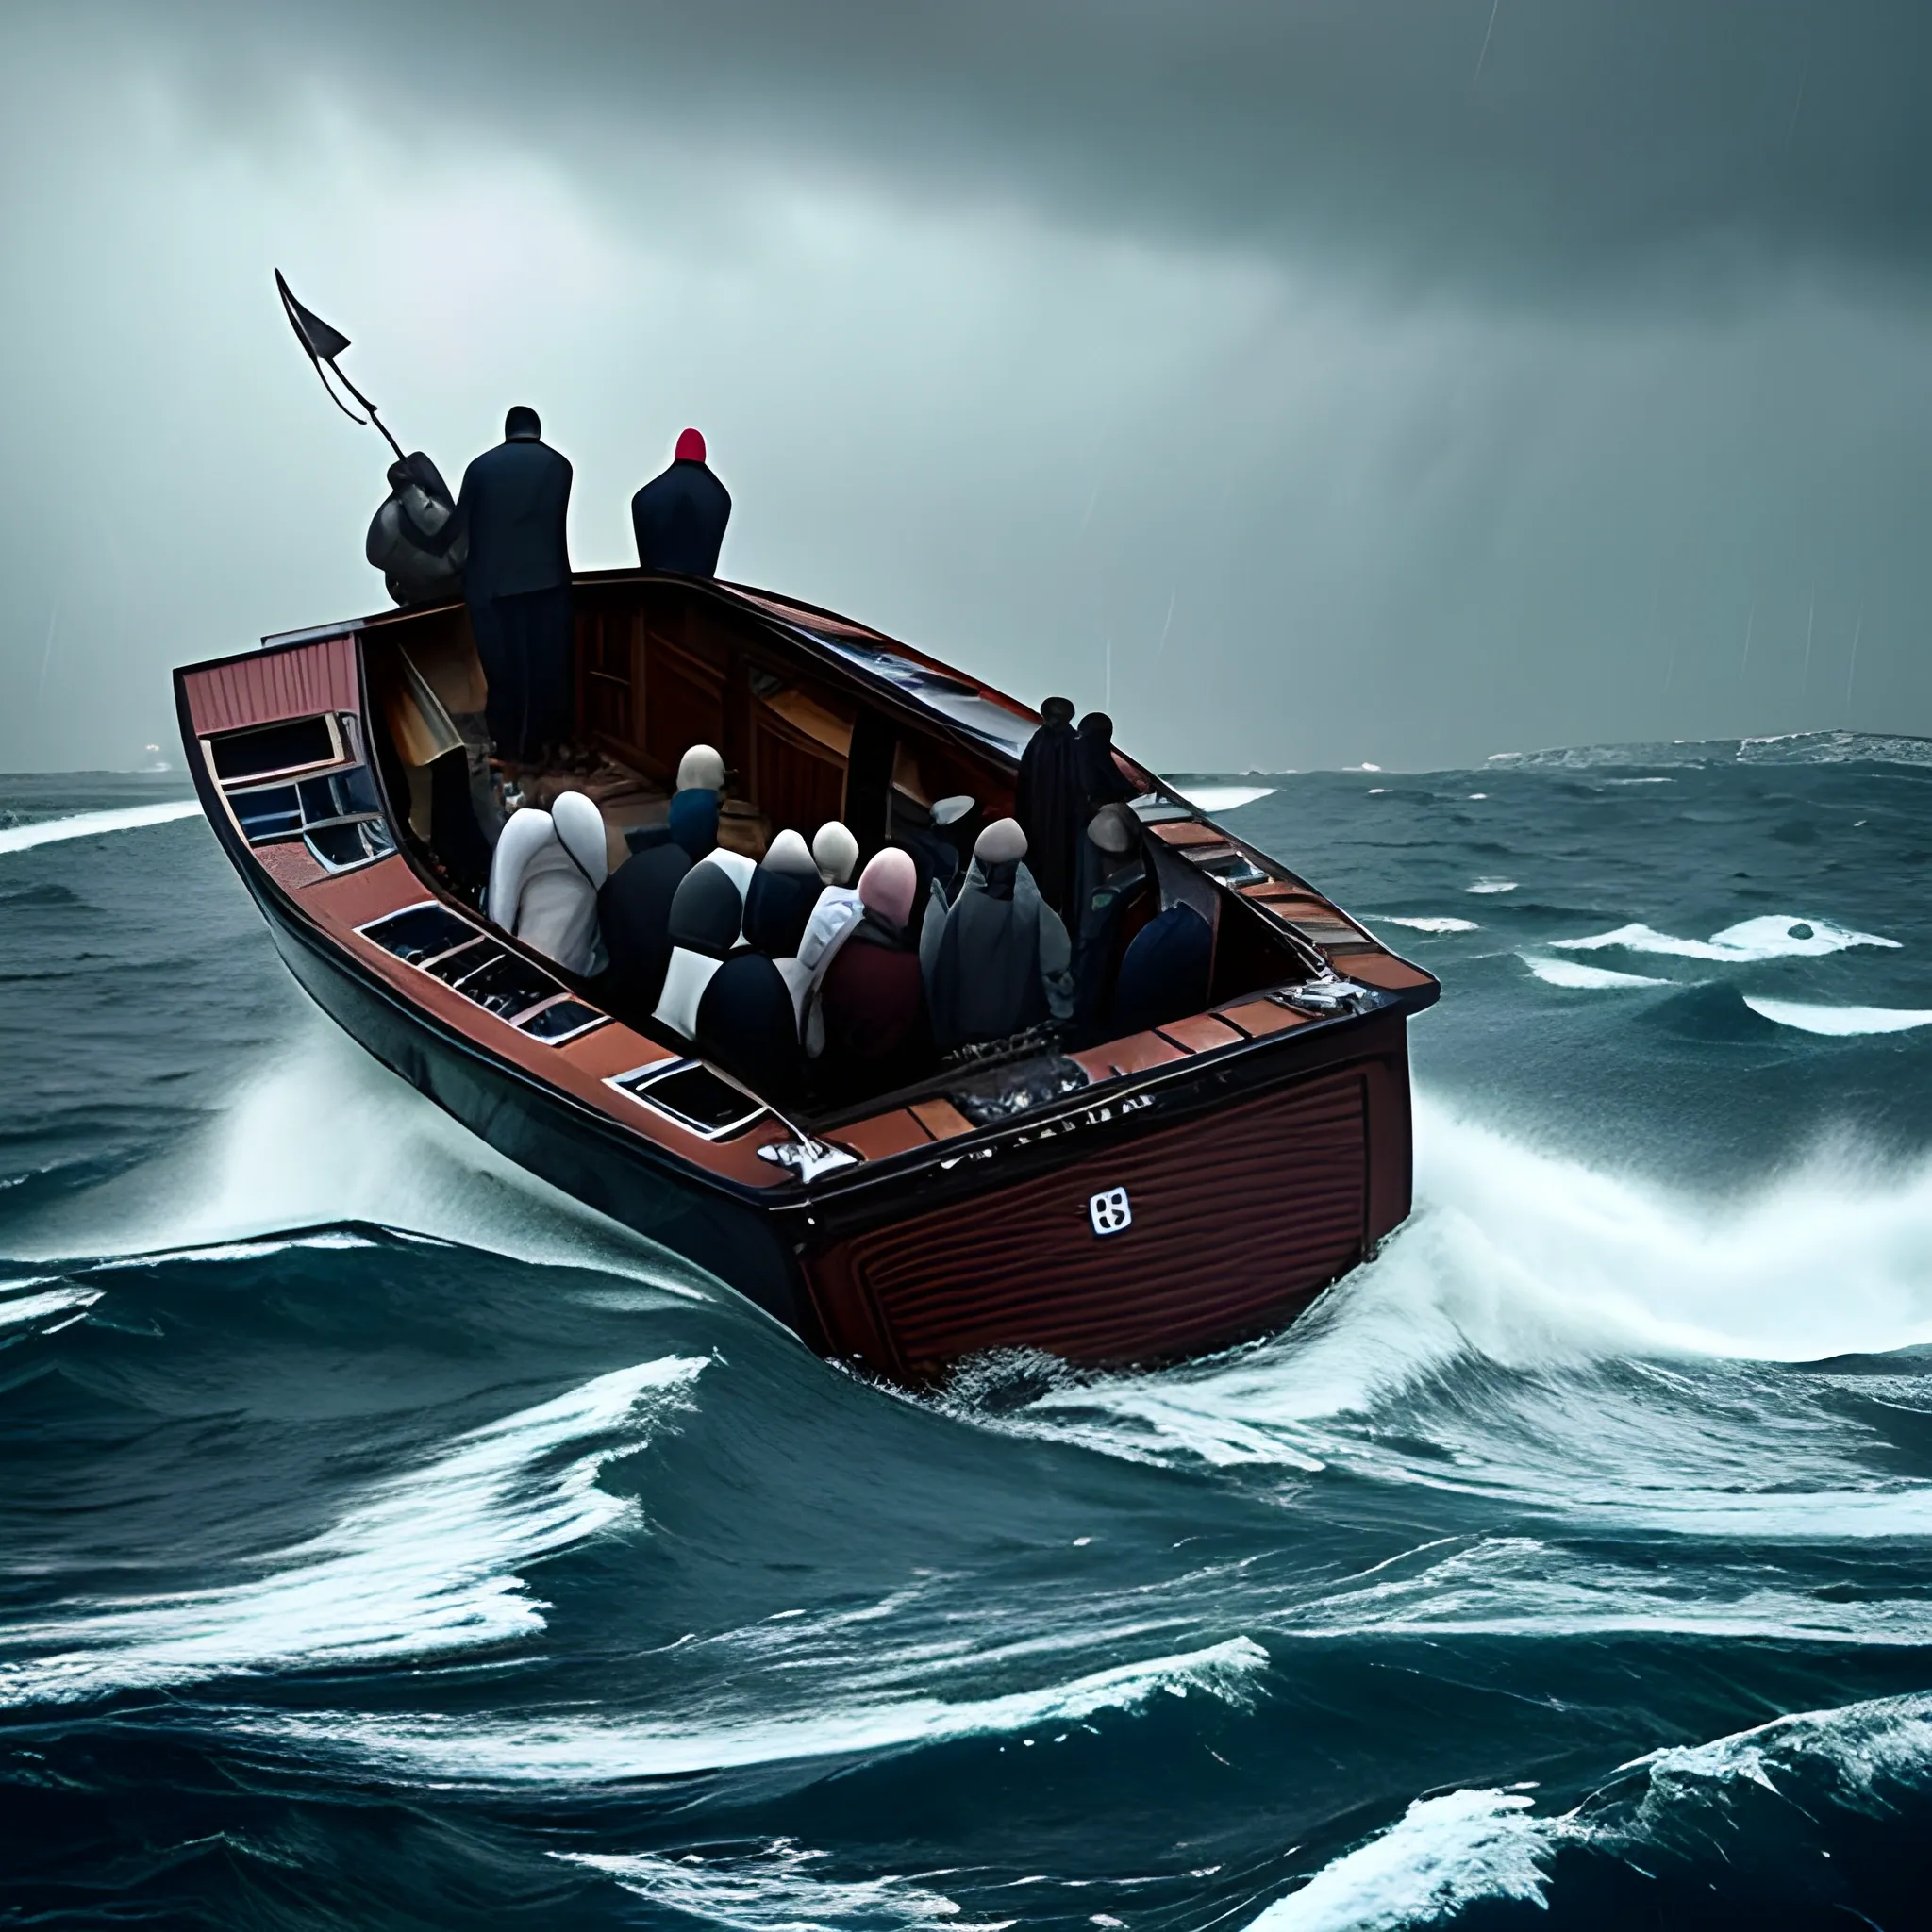 ghost migrants on a small boat on the stormy sea, photography